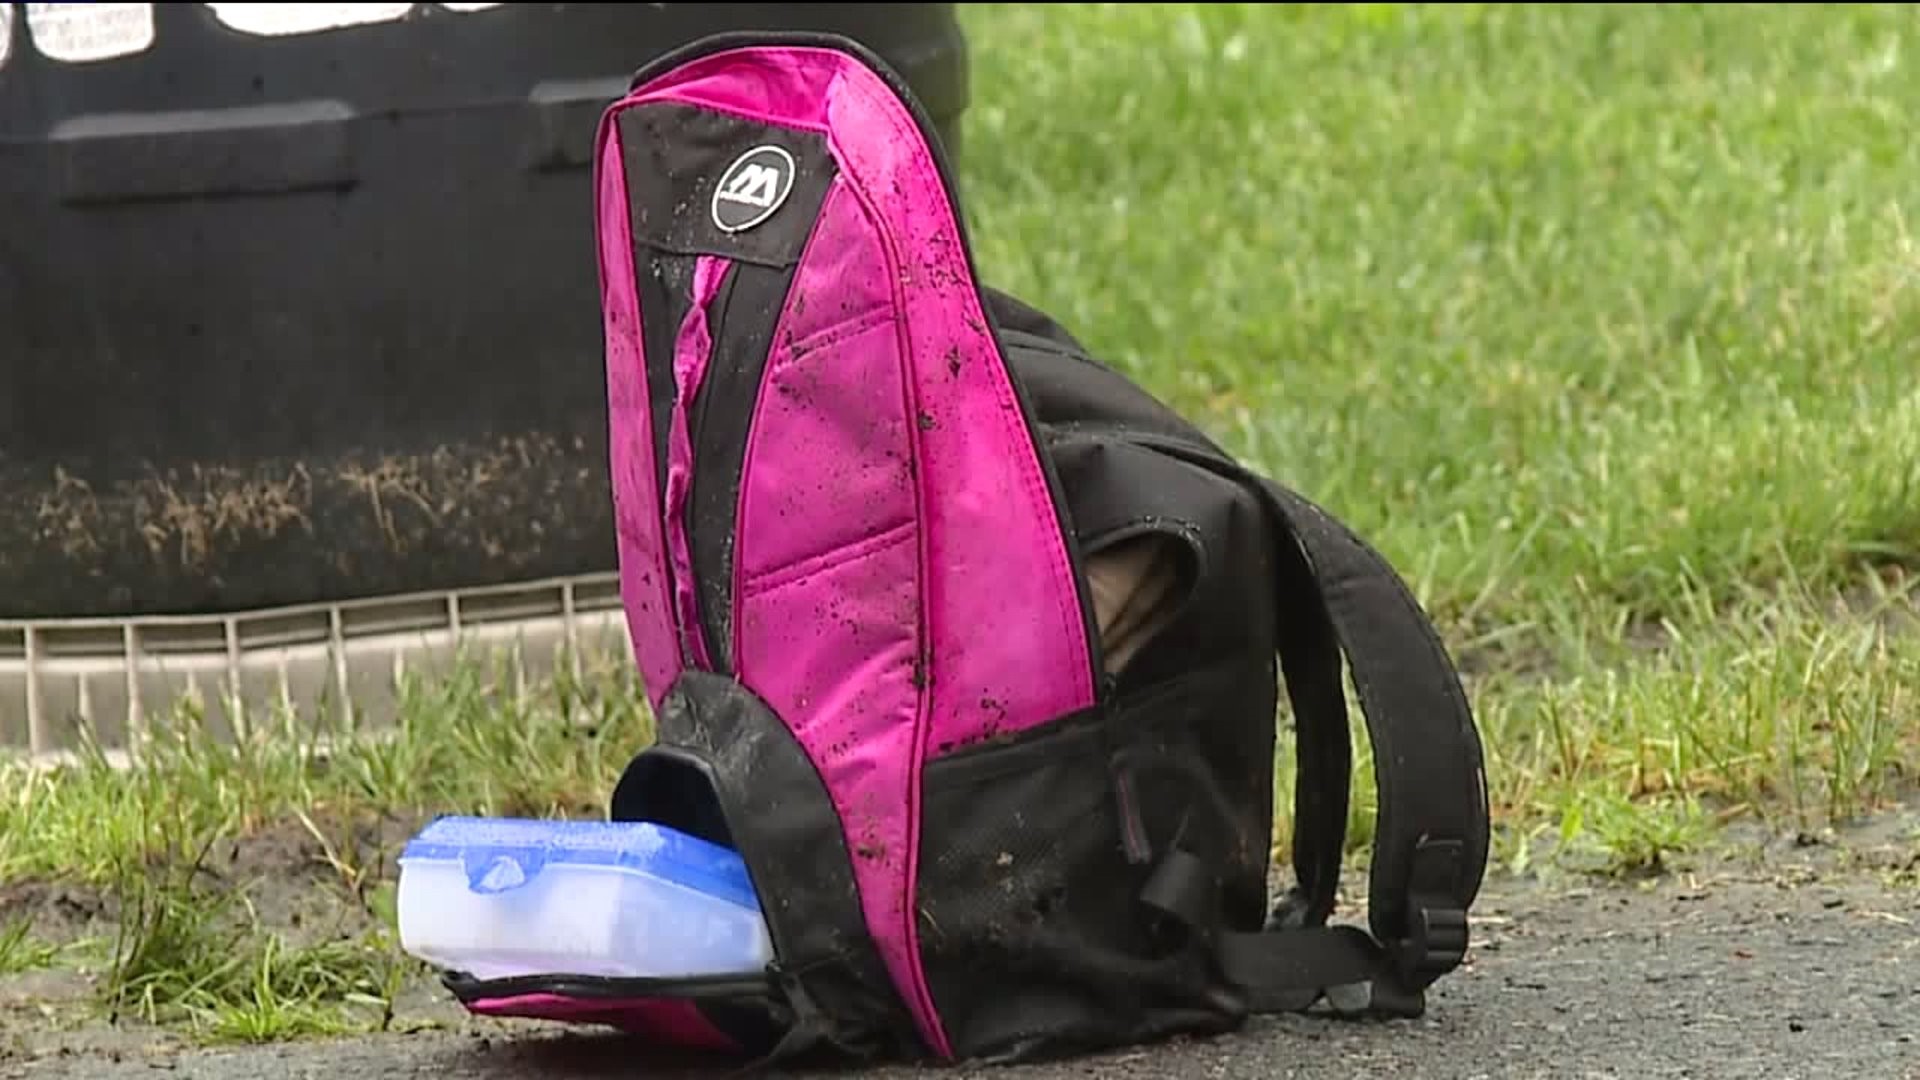 Dead Dog Found in Backpack